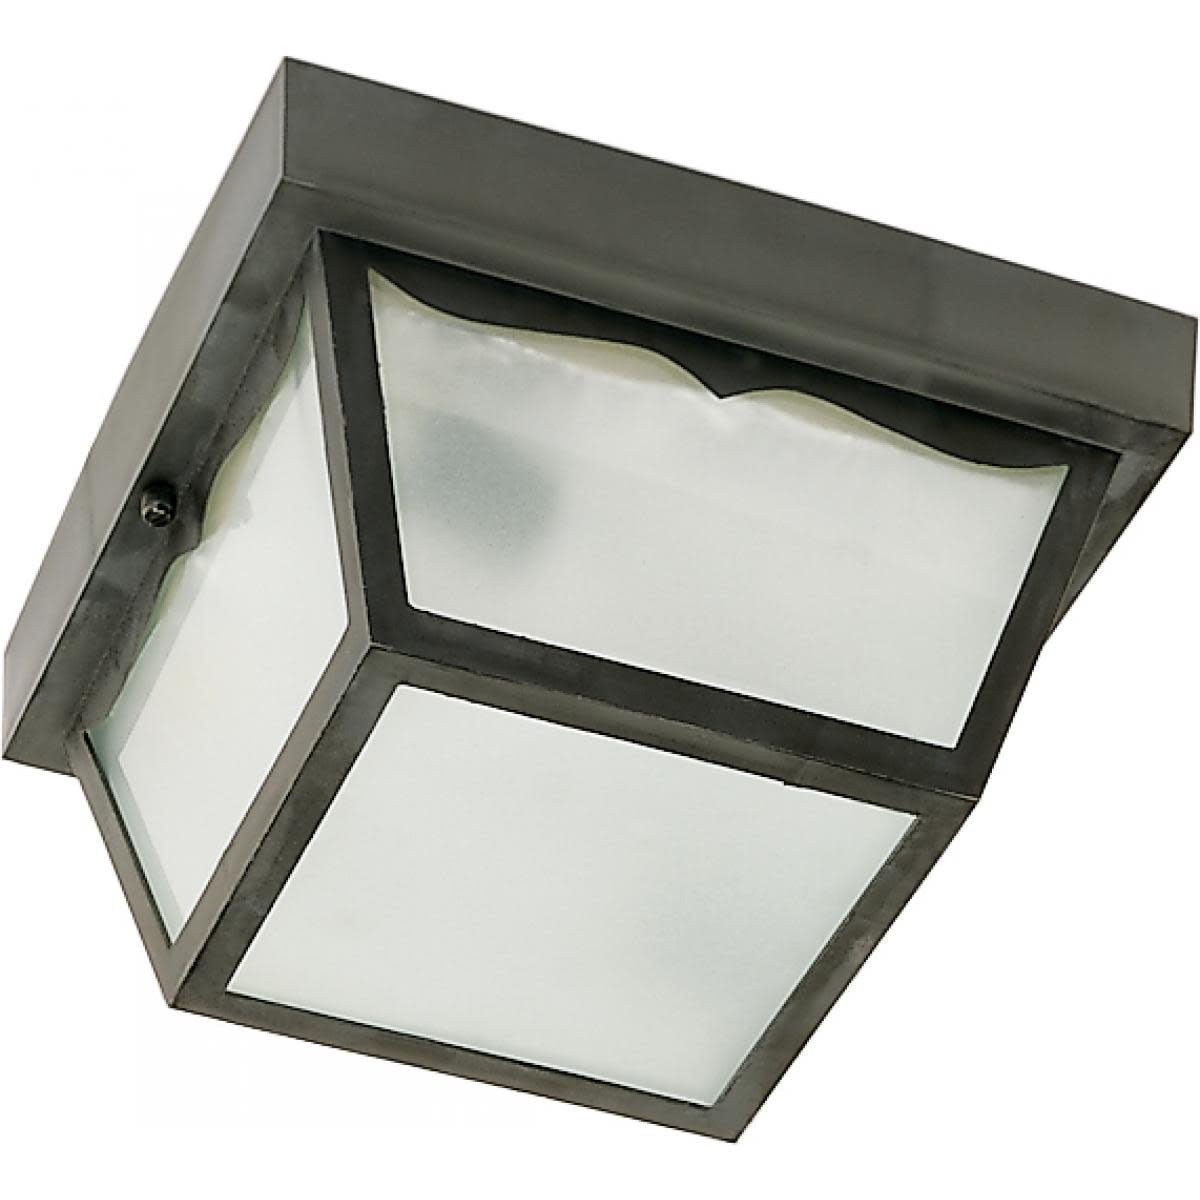 Vented Fireplace Pil No. 0199059 Wolf Steel Top covertible Sit Flush Mount 